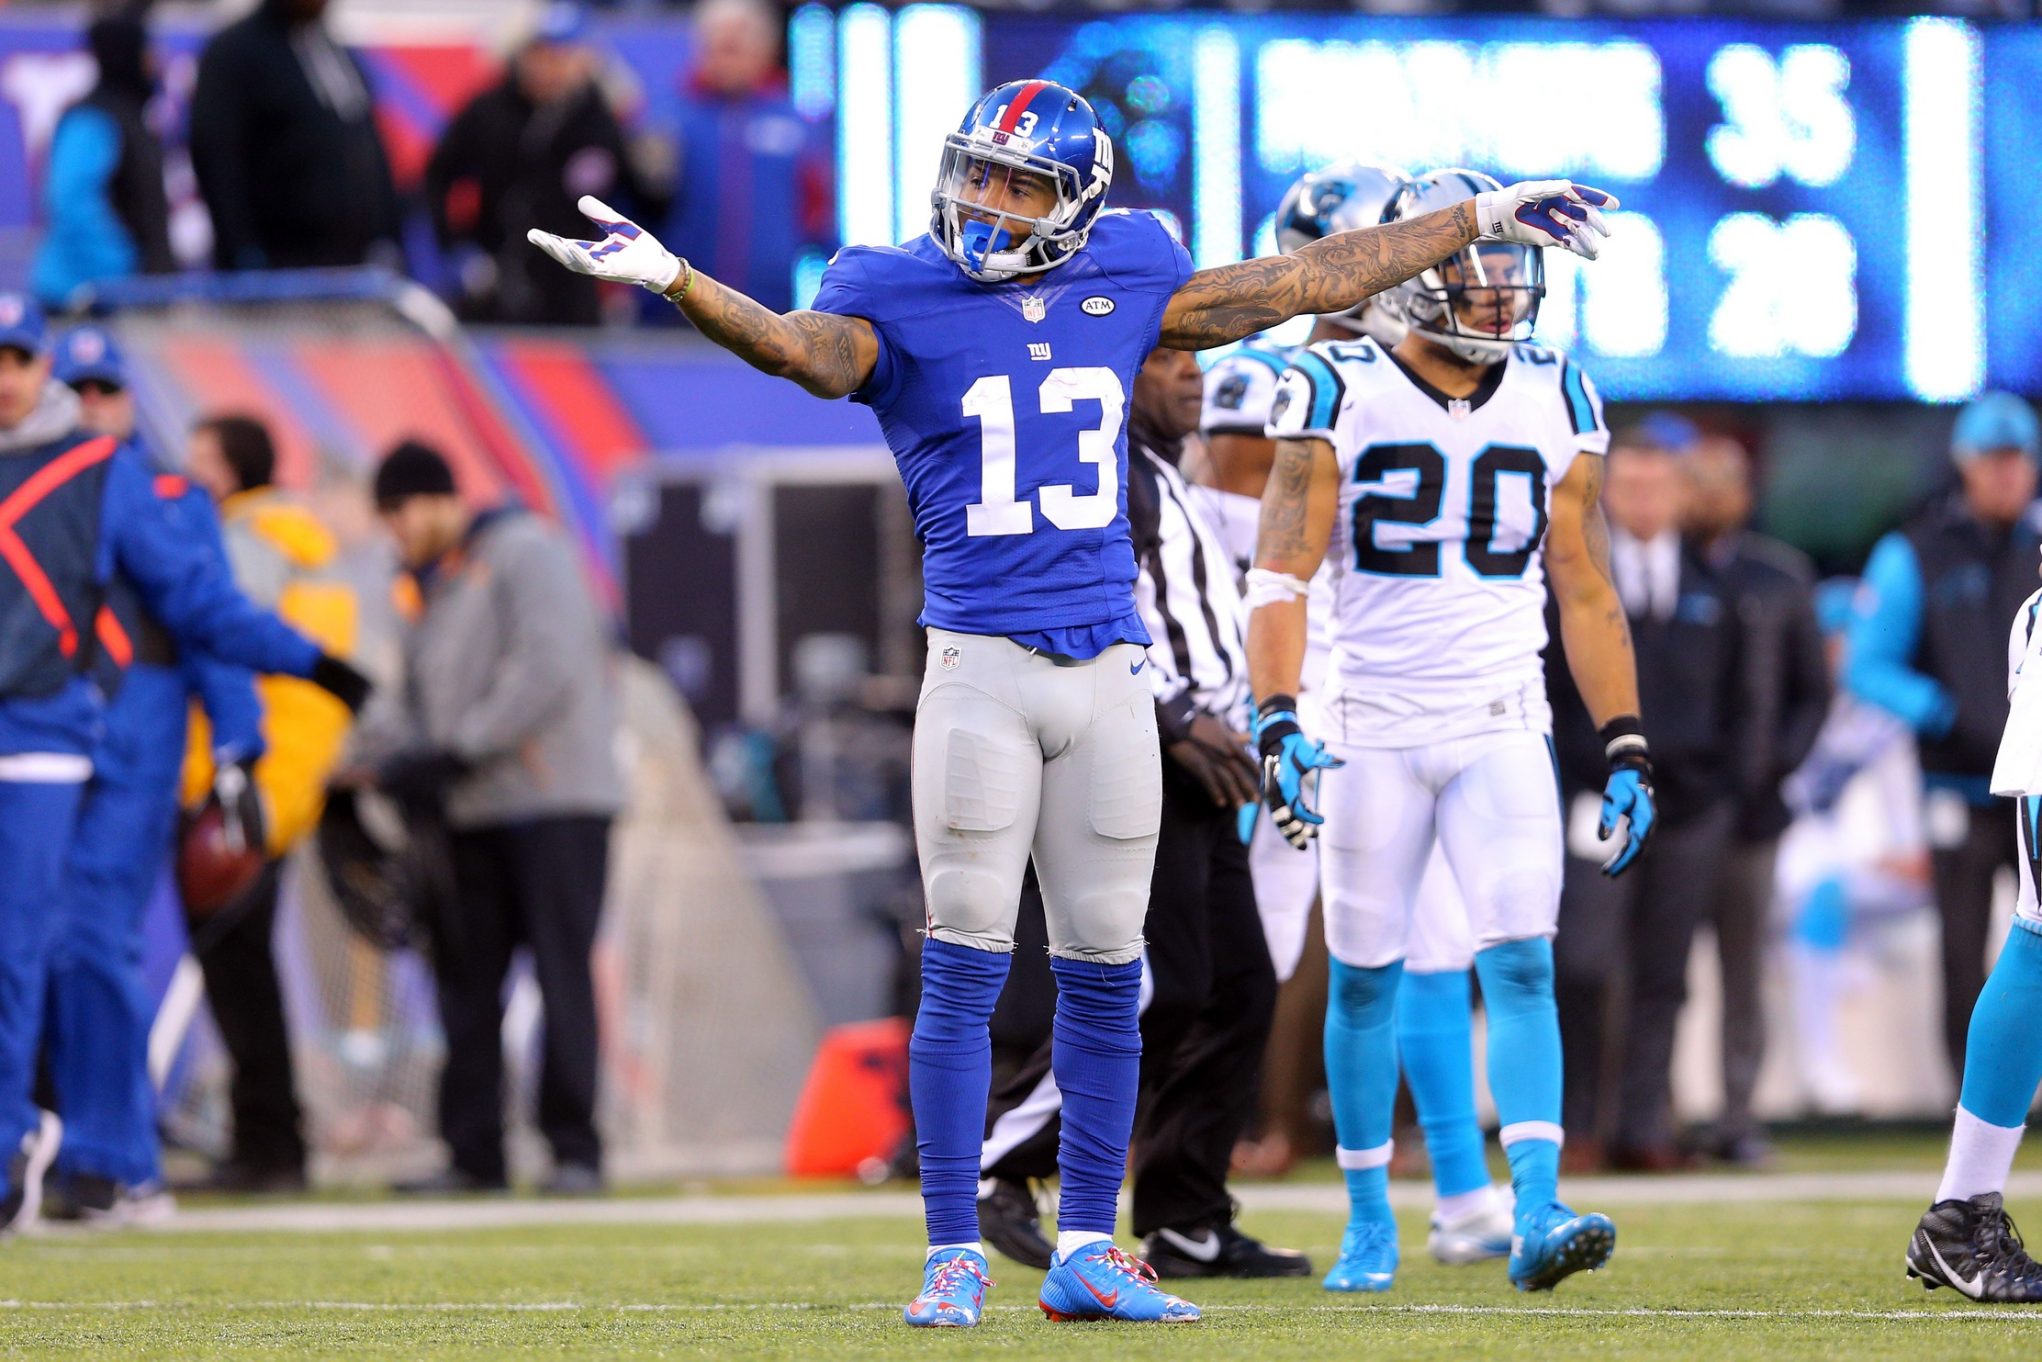 If New York Giants' Odell Beckham Jr. Wants To Be The Best, He Must Change His Ways 